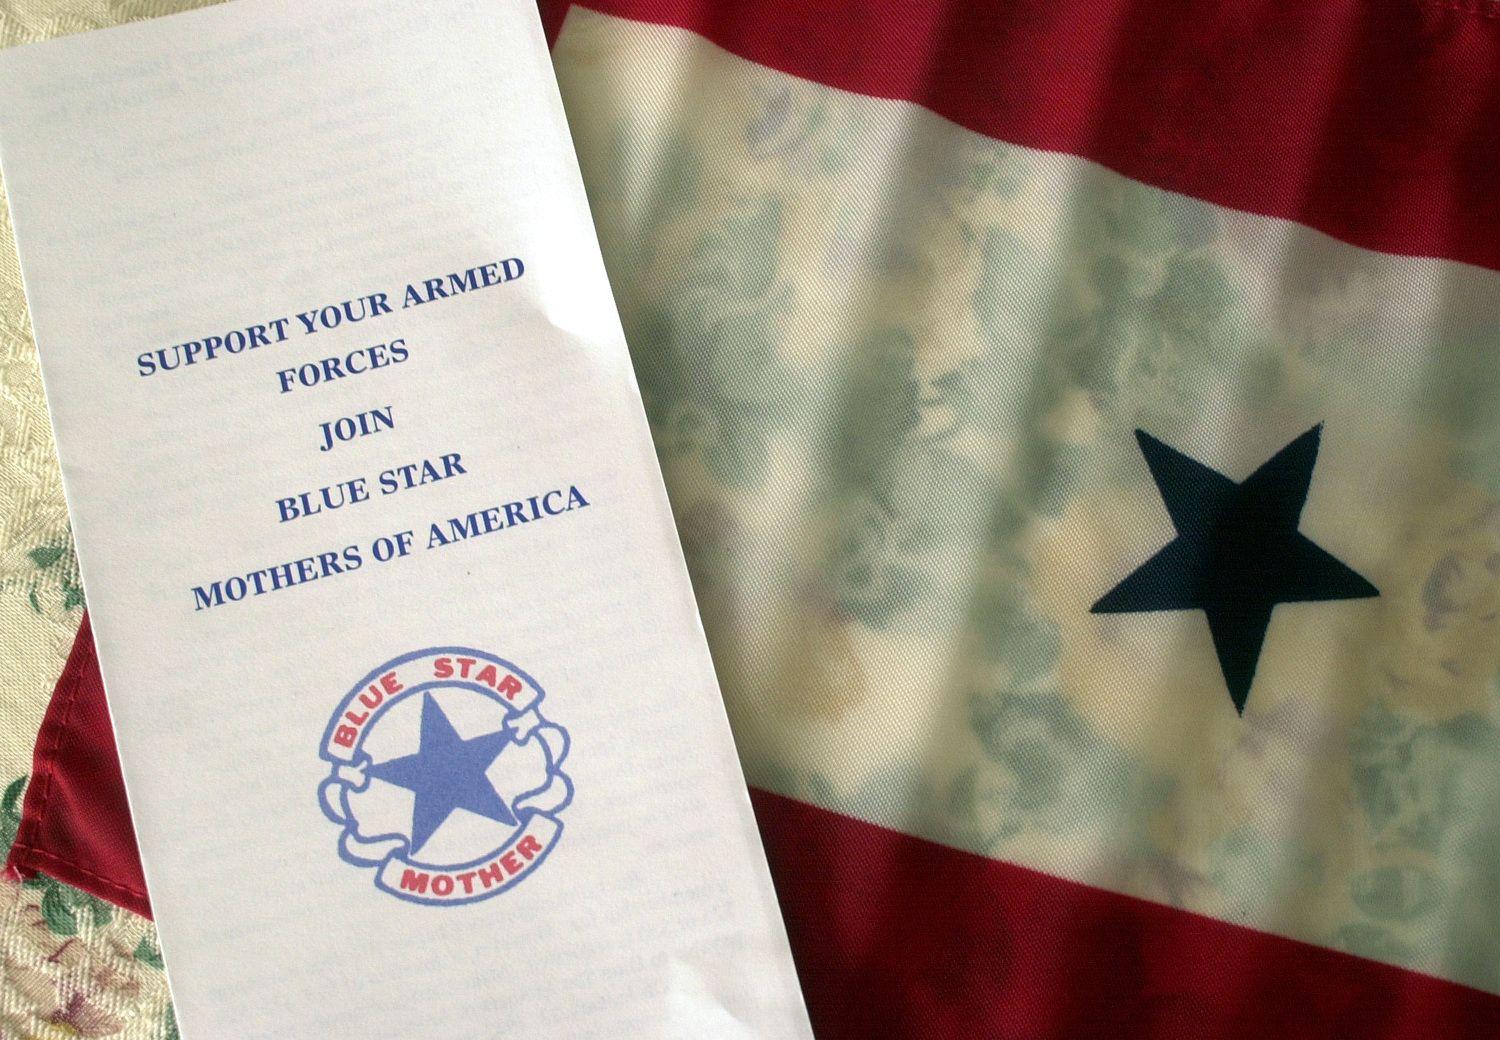 Blue Star Mother's of America Logo - Blue Star Mothers Questioned Over Terminations